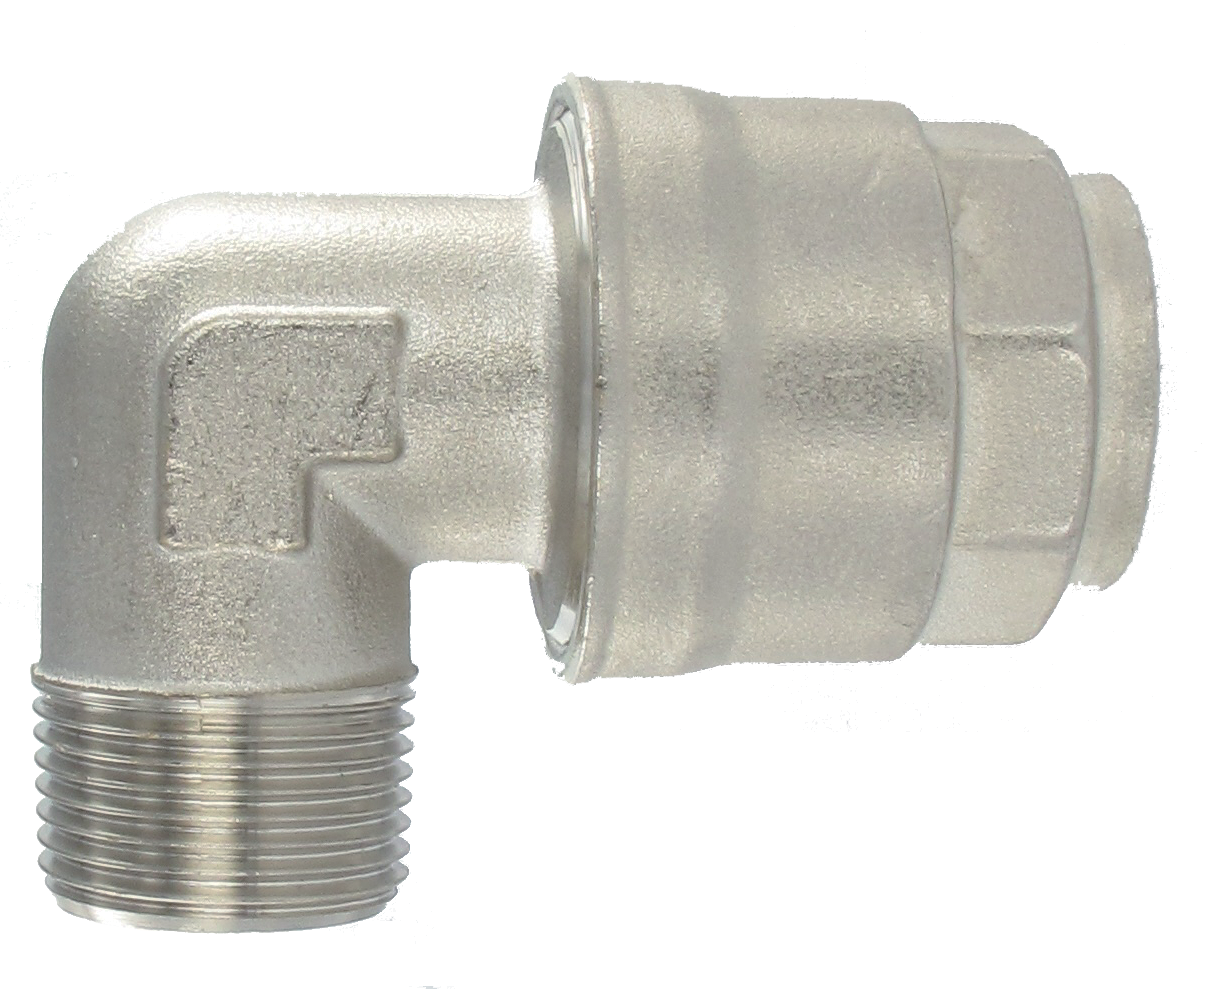 Nickel-plated brass BSP tapered male L fittings